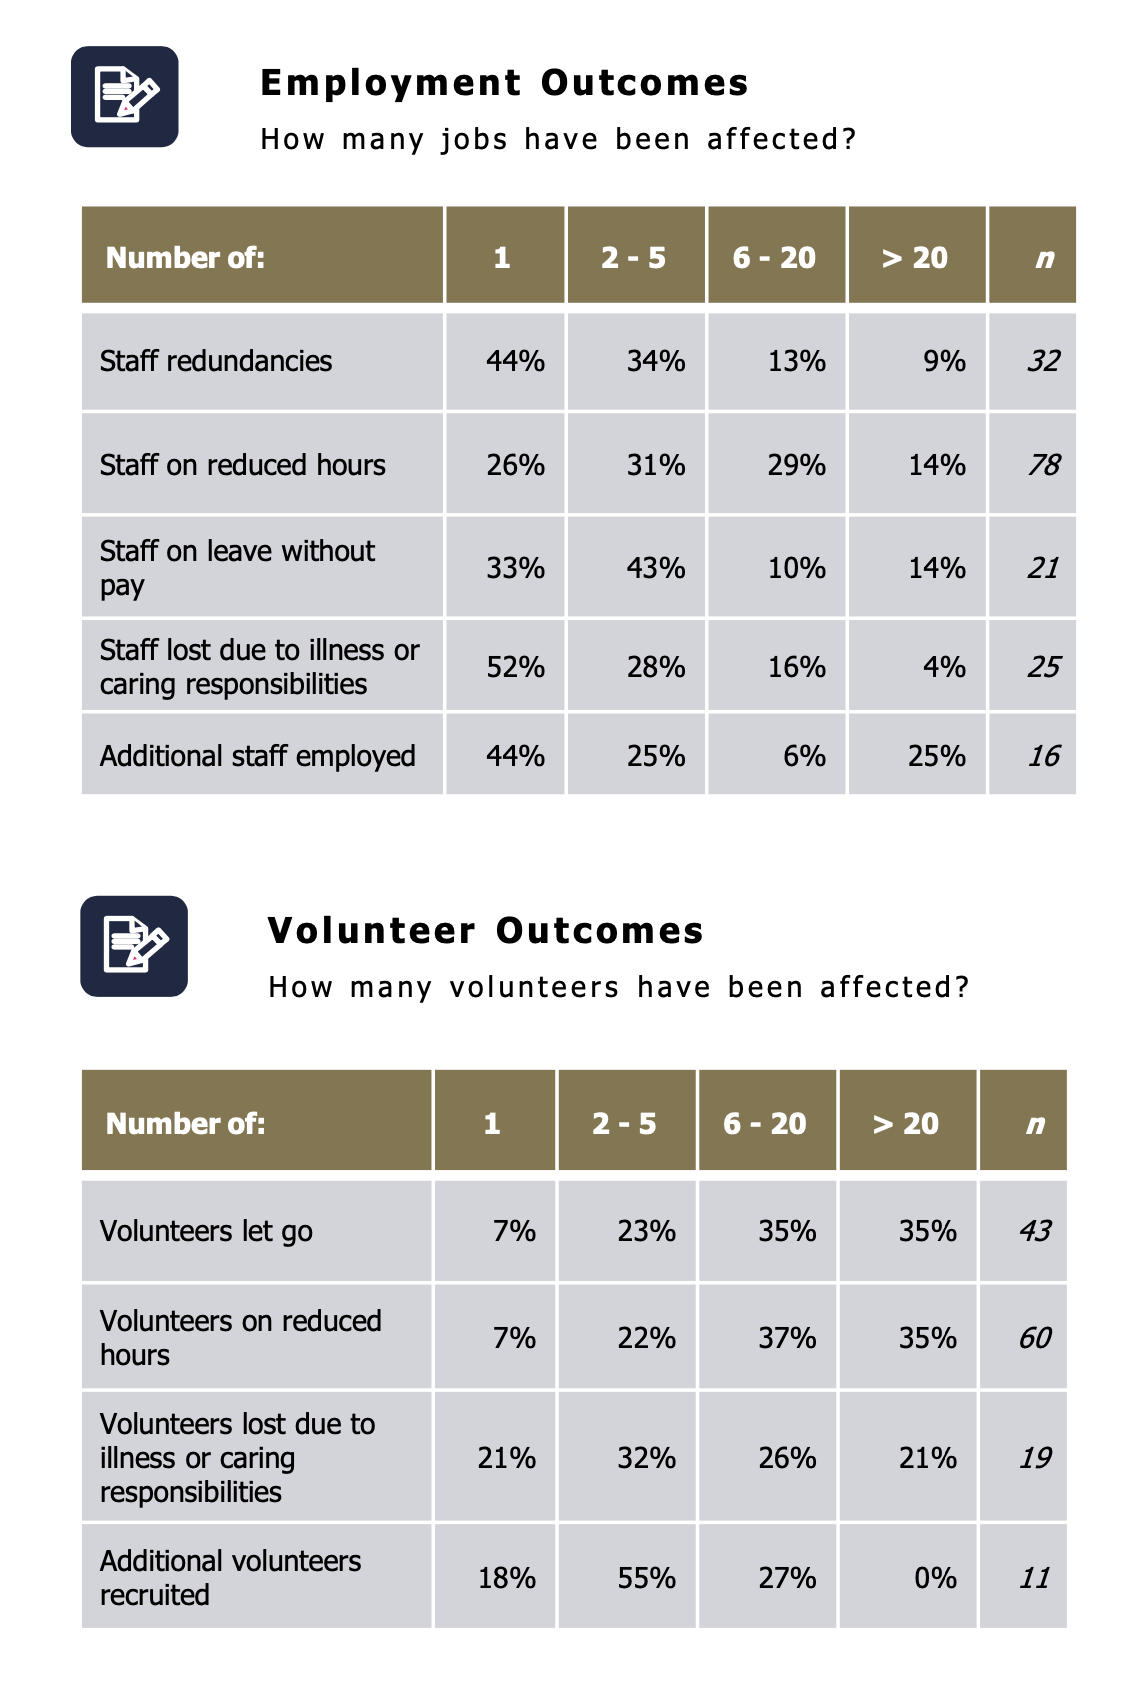 Employment and Volunteer Outcomes